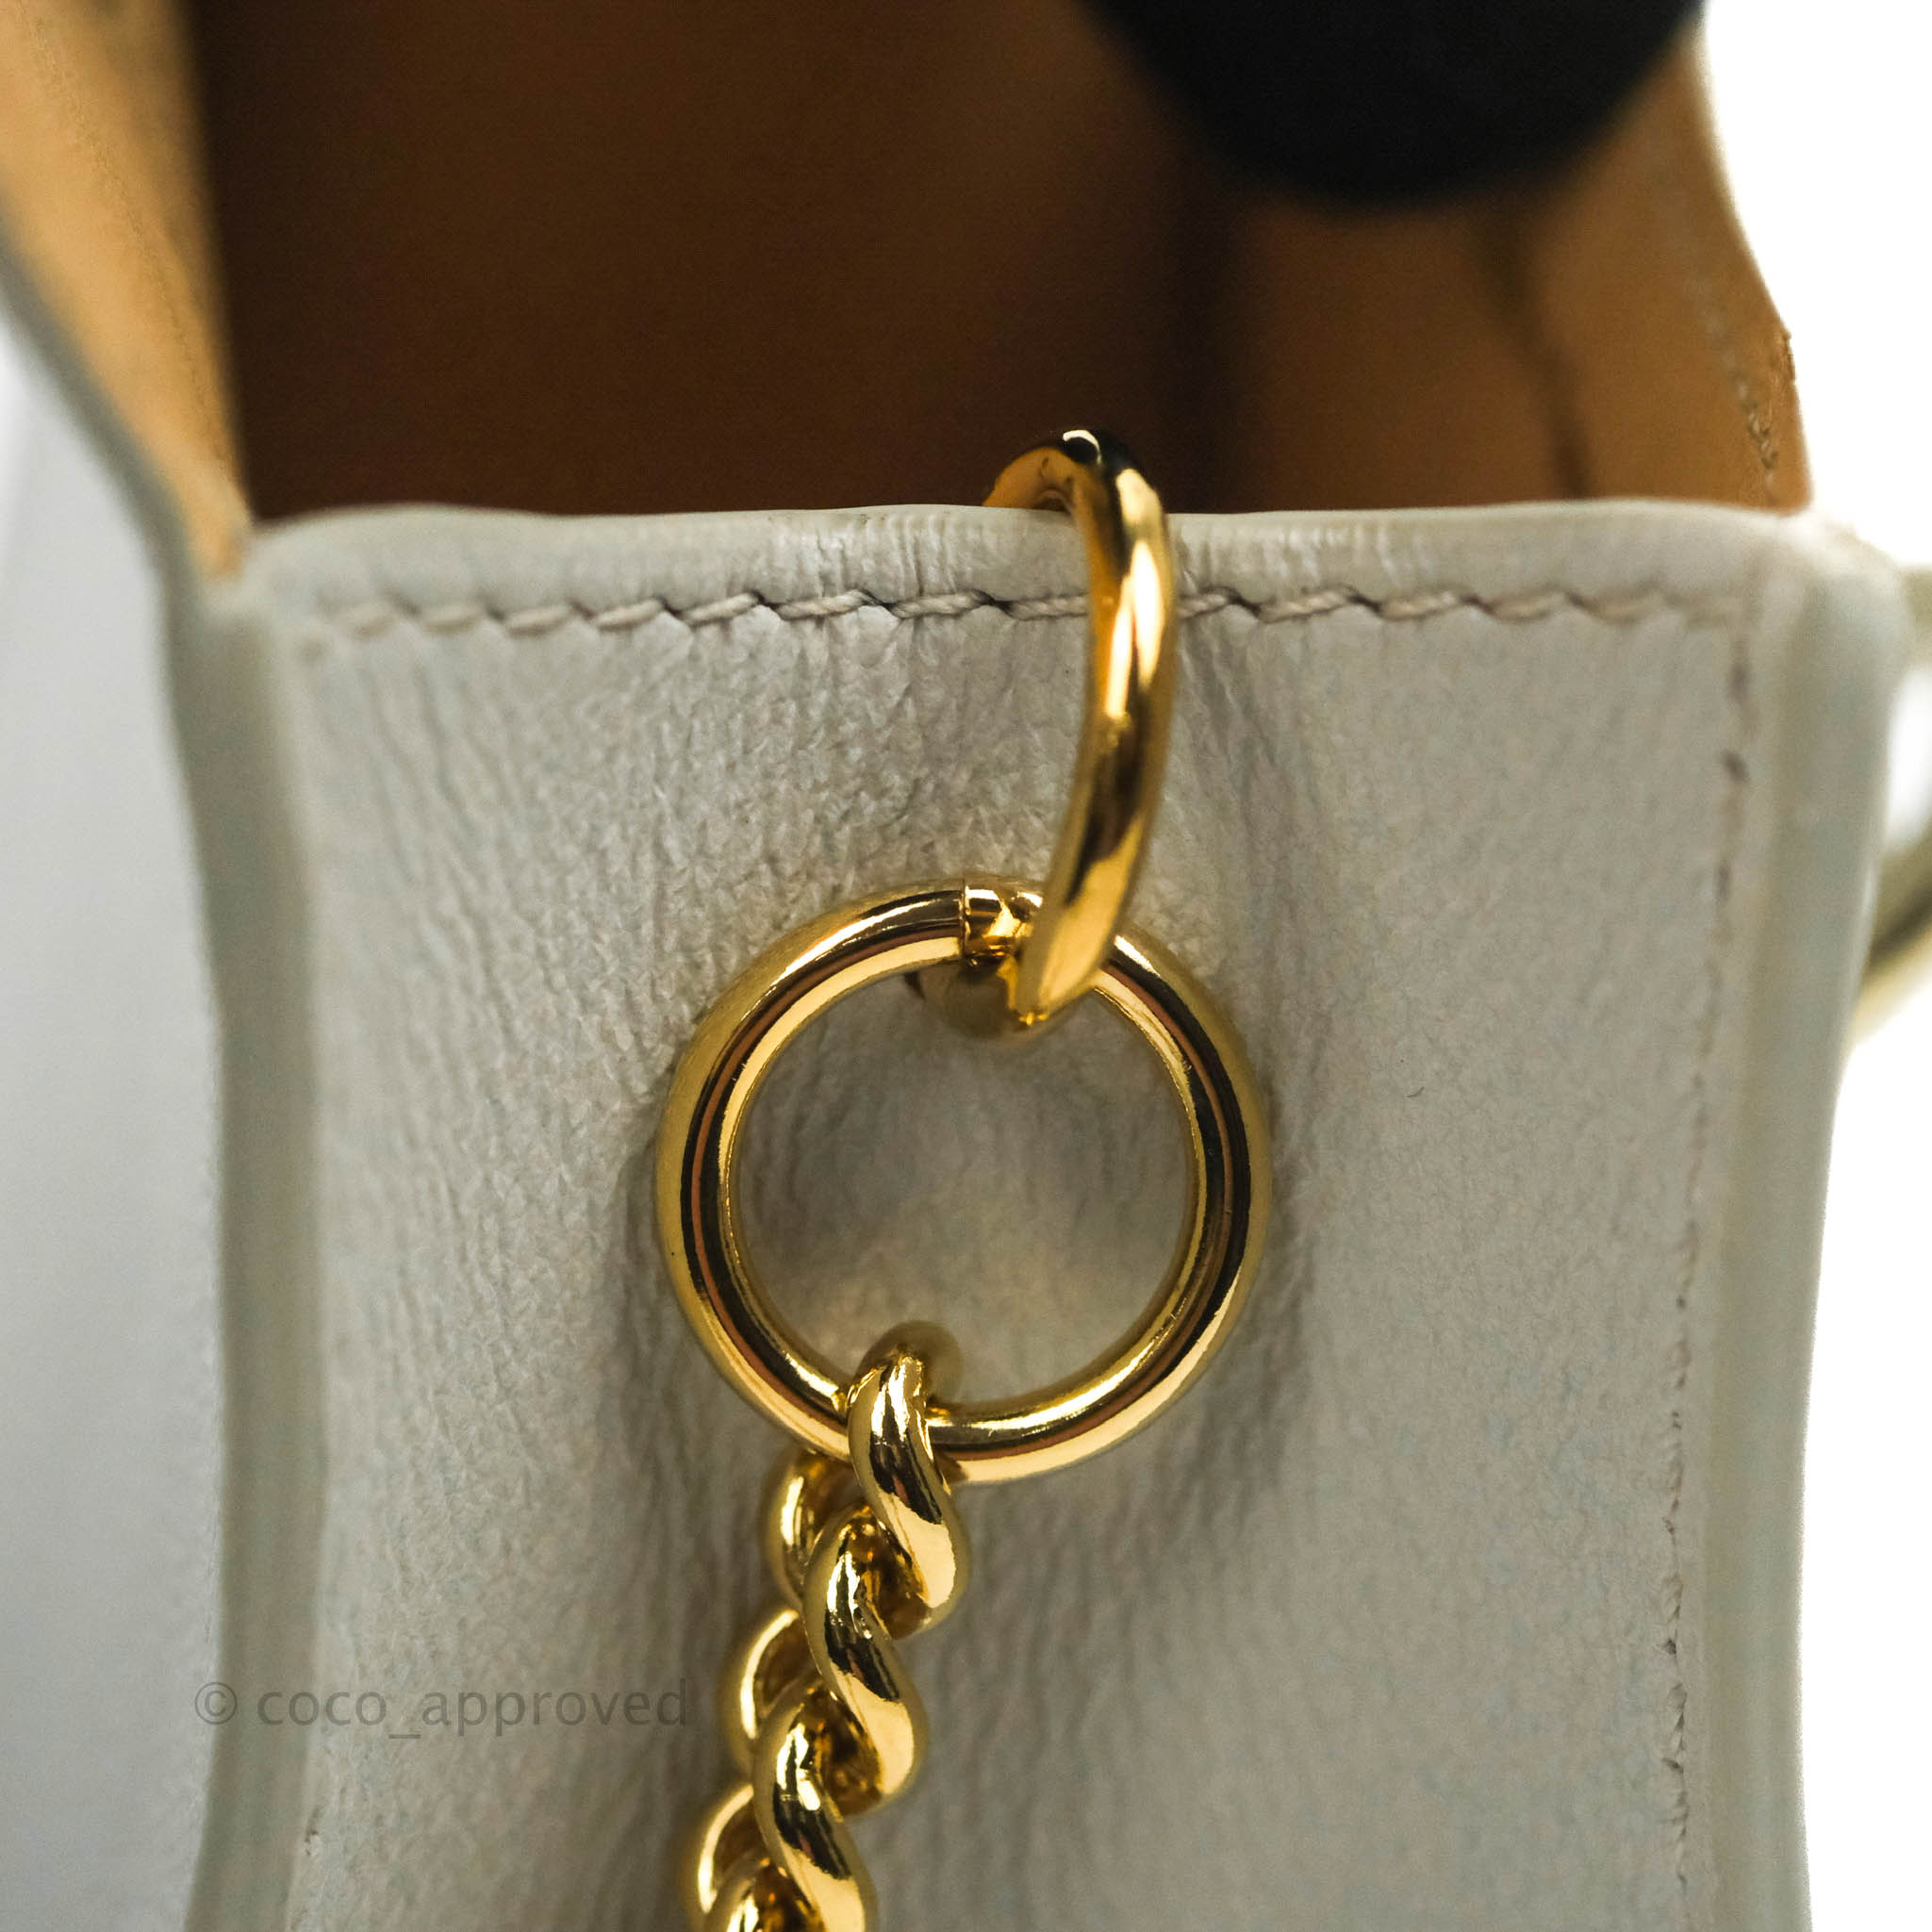 Delvaux Brillant Bag Charm Reference Guide - Spotted Fashion